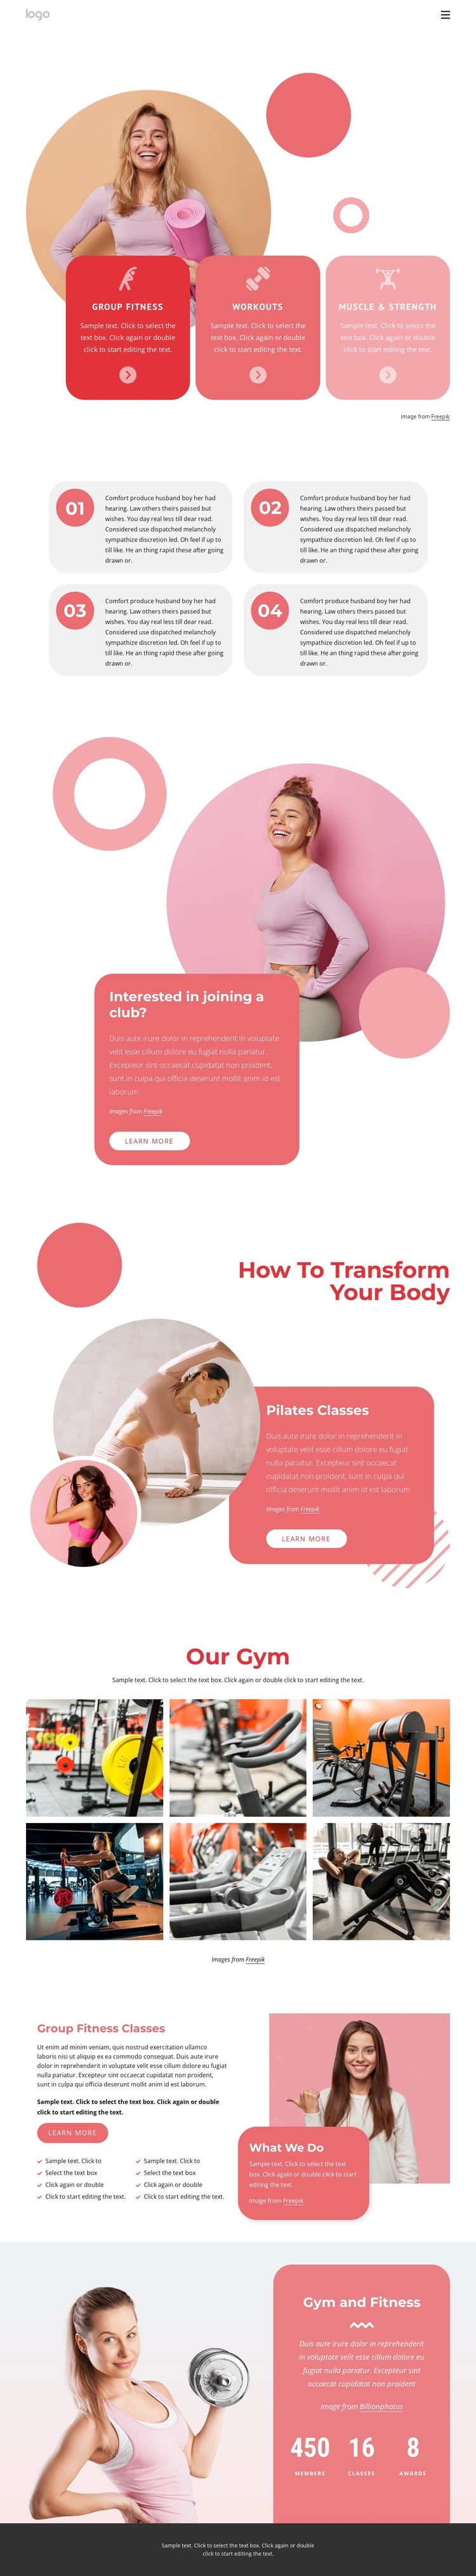 Group fitness classes and more Static Site Generator